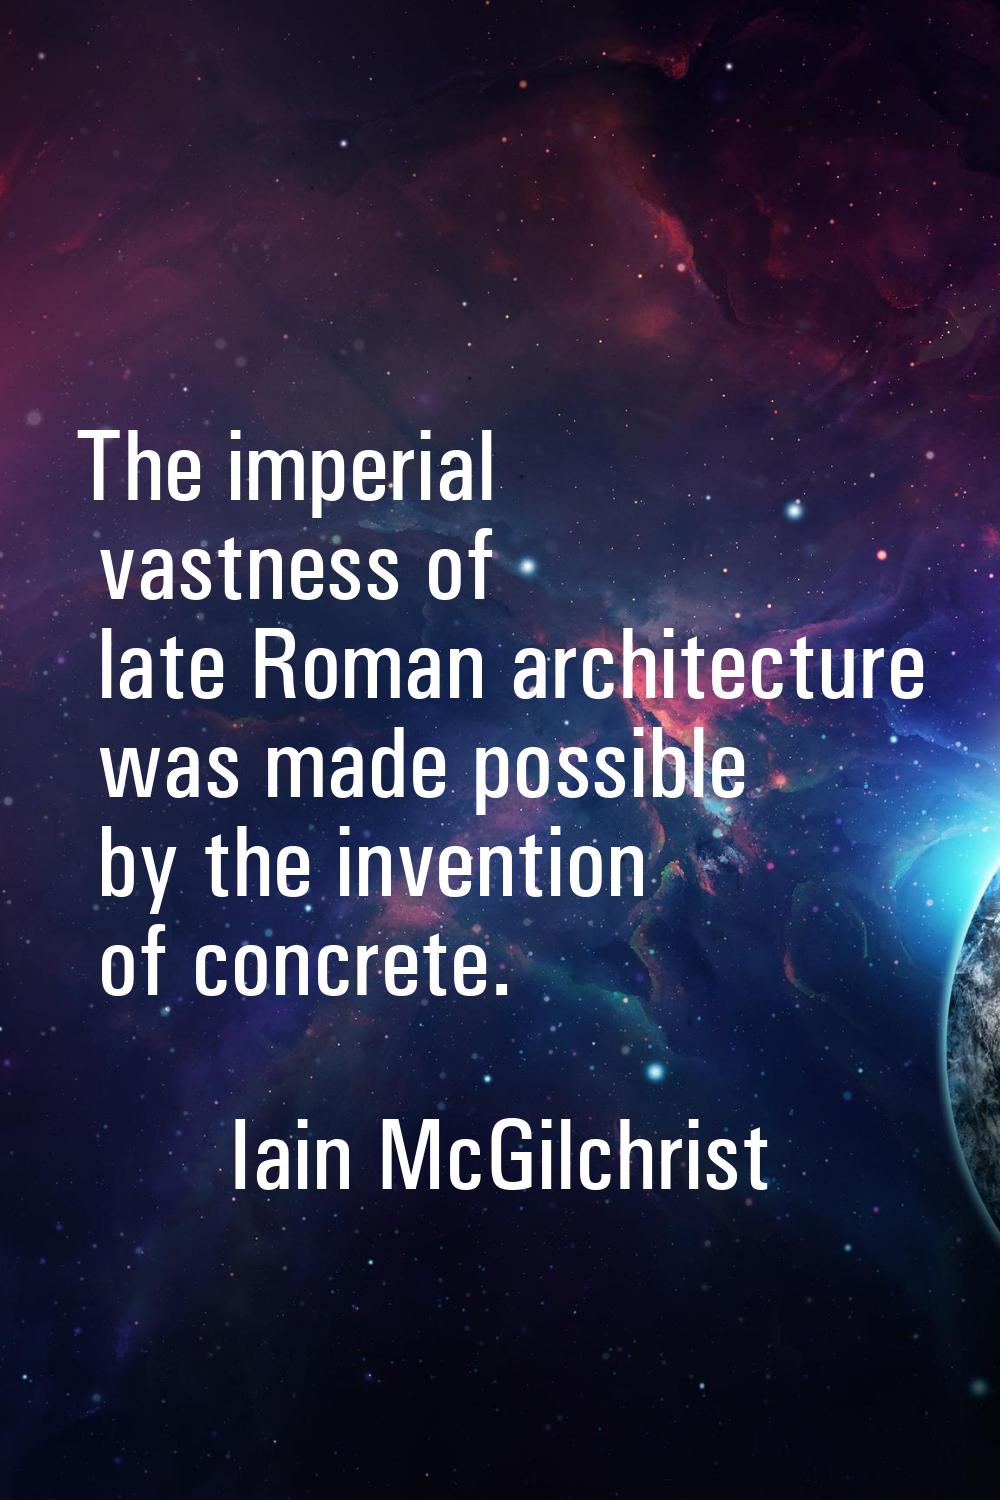 The imperial vastness of late Roman architecture was made possible by the invention of concrete.